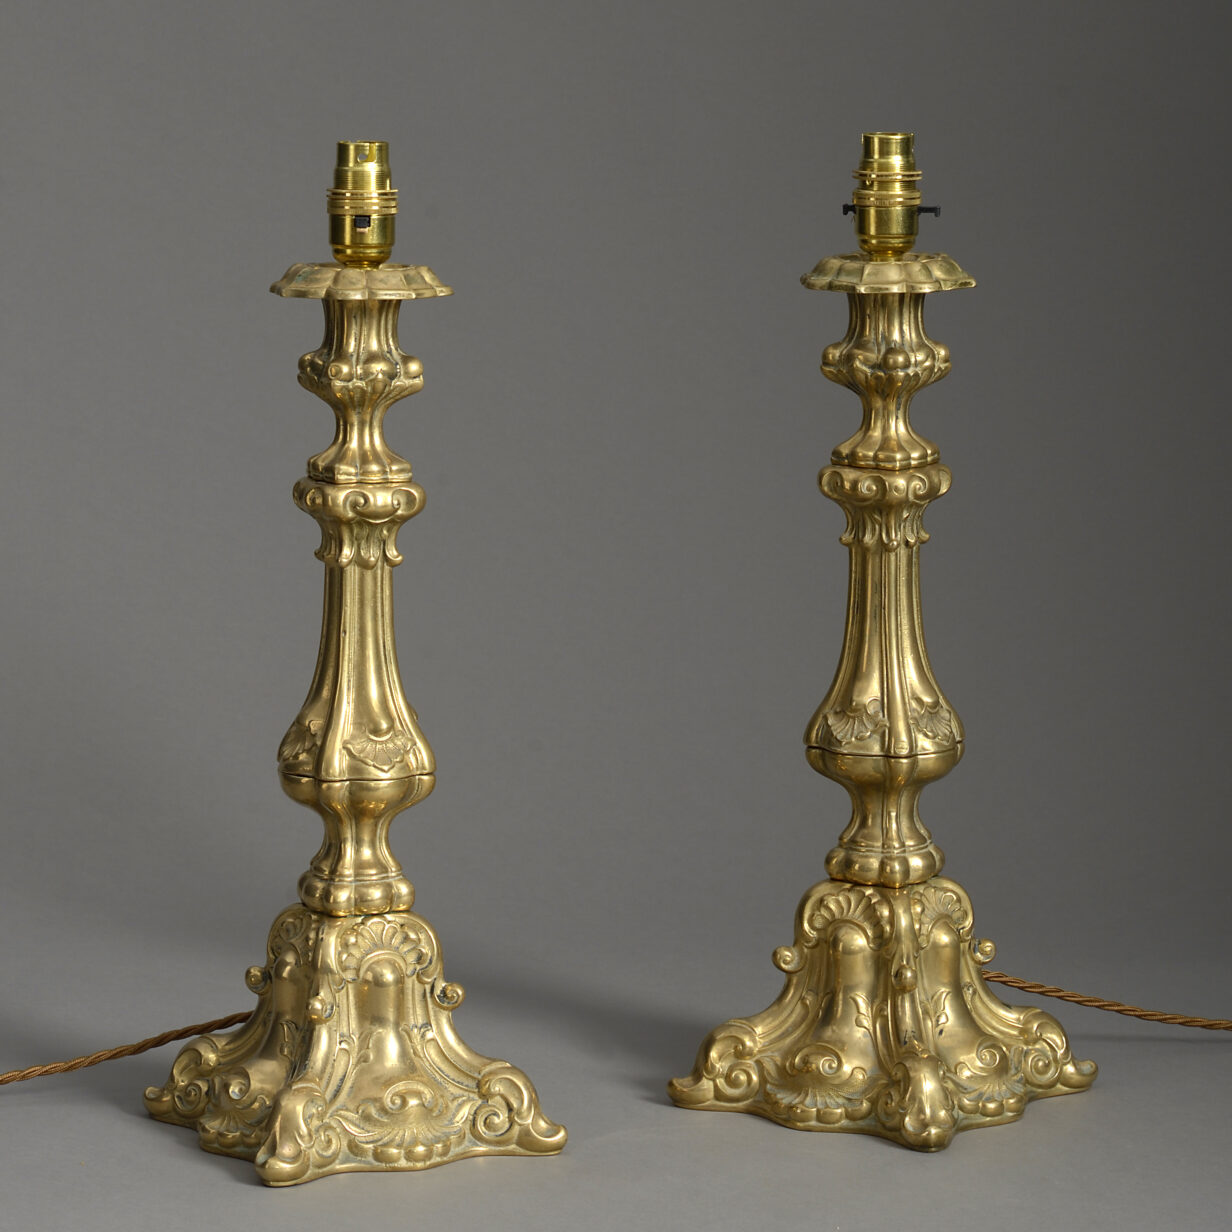 Pair of Polished Cast Brass Rococo Revival Lamps